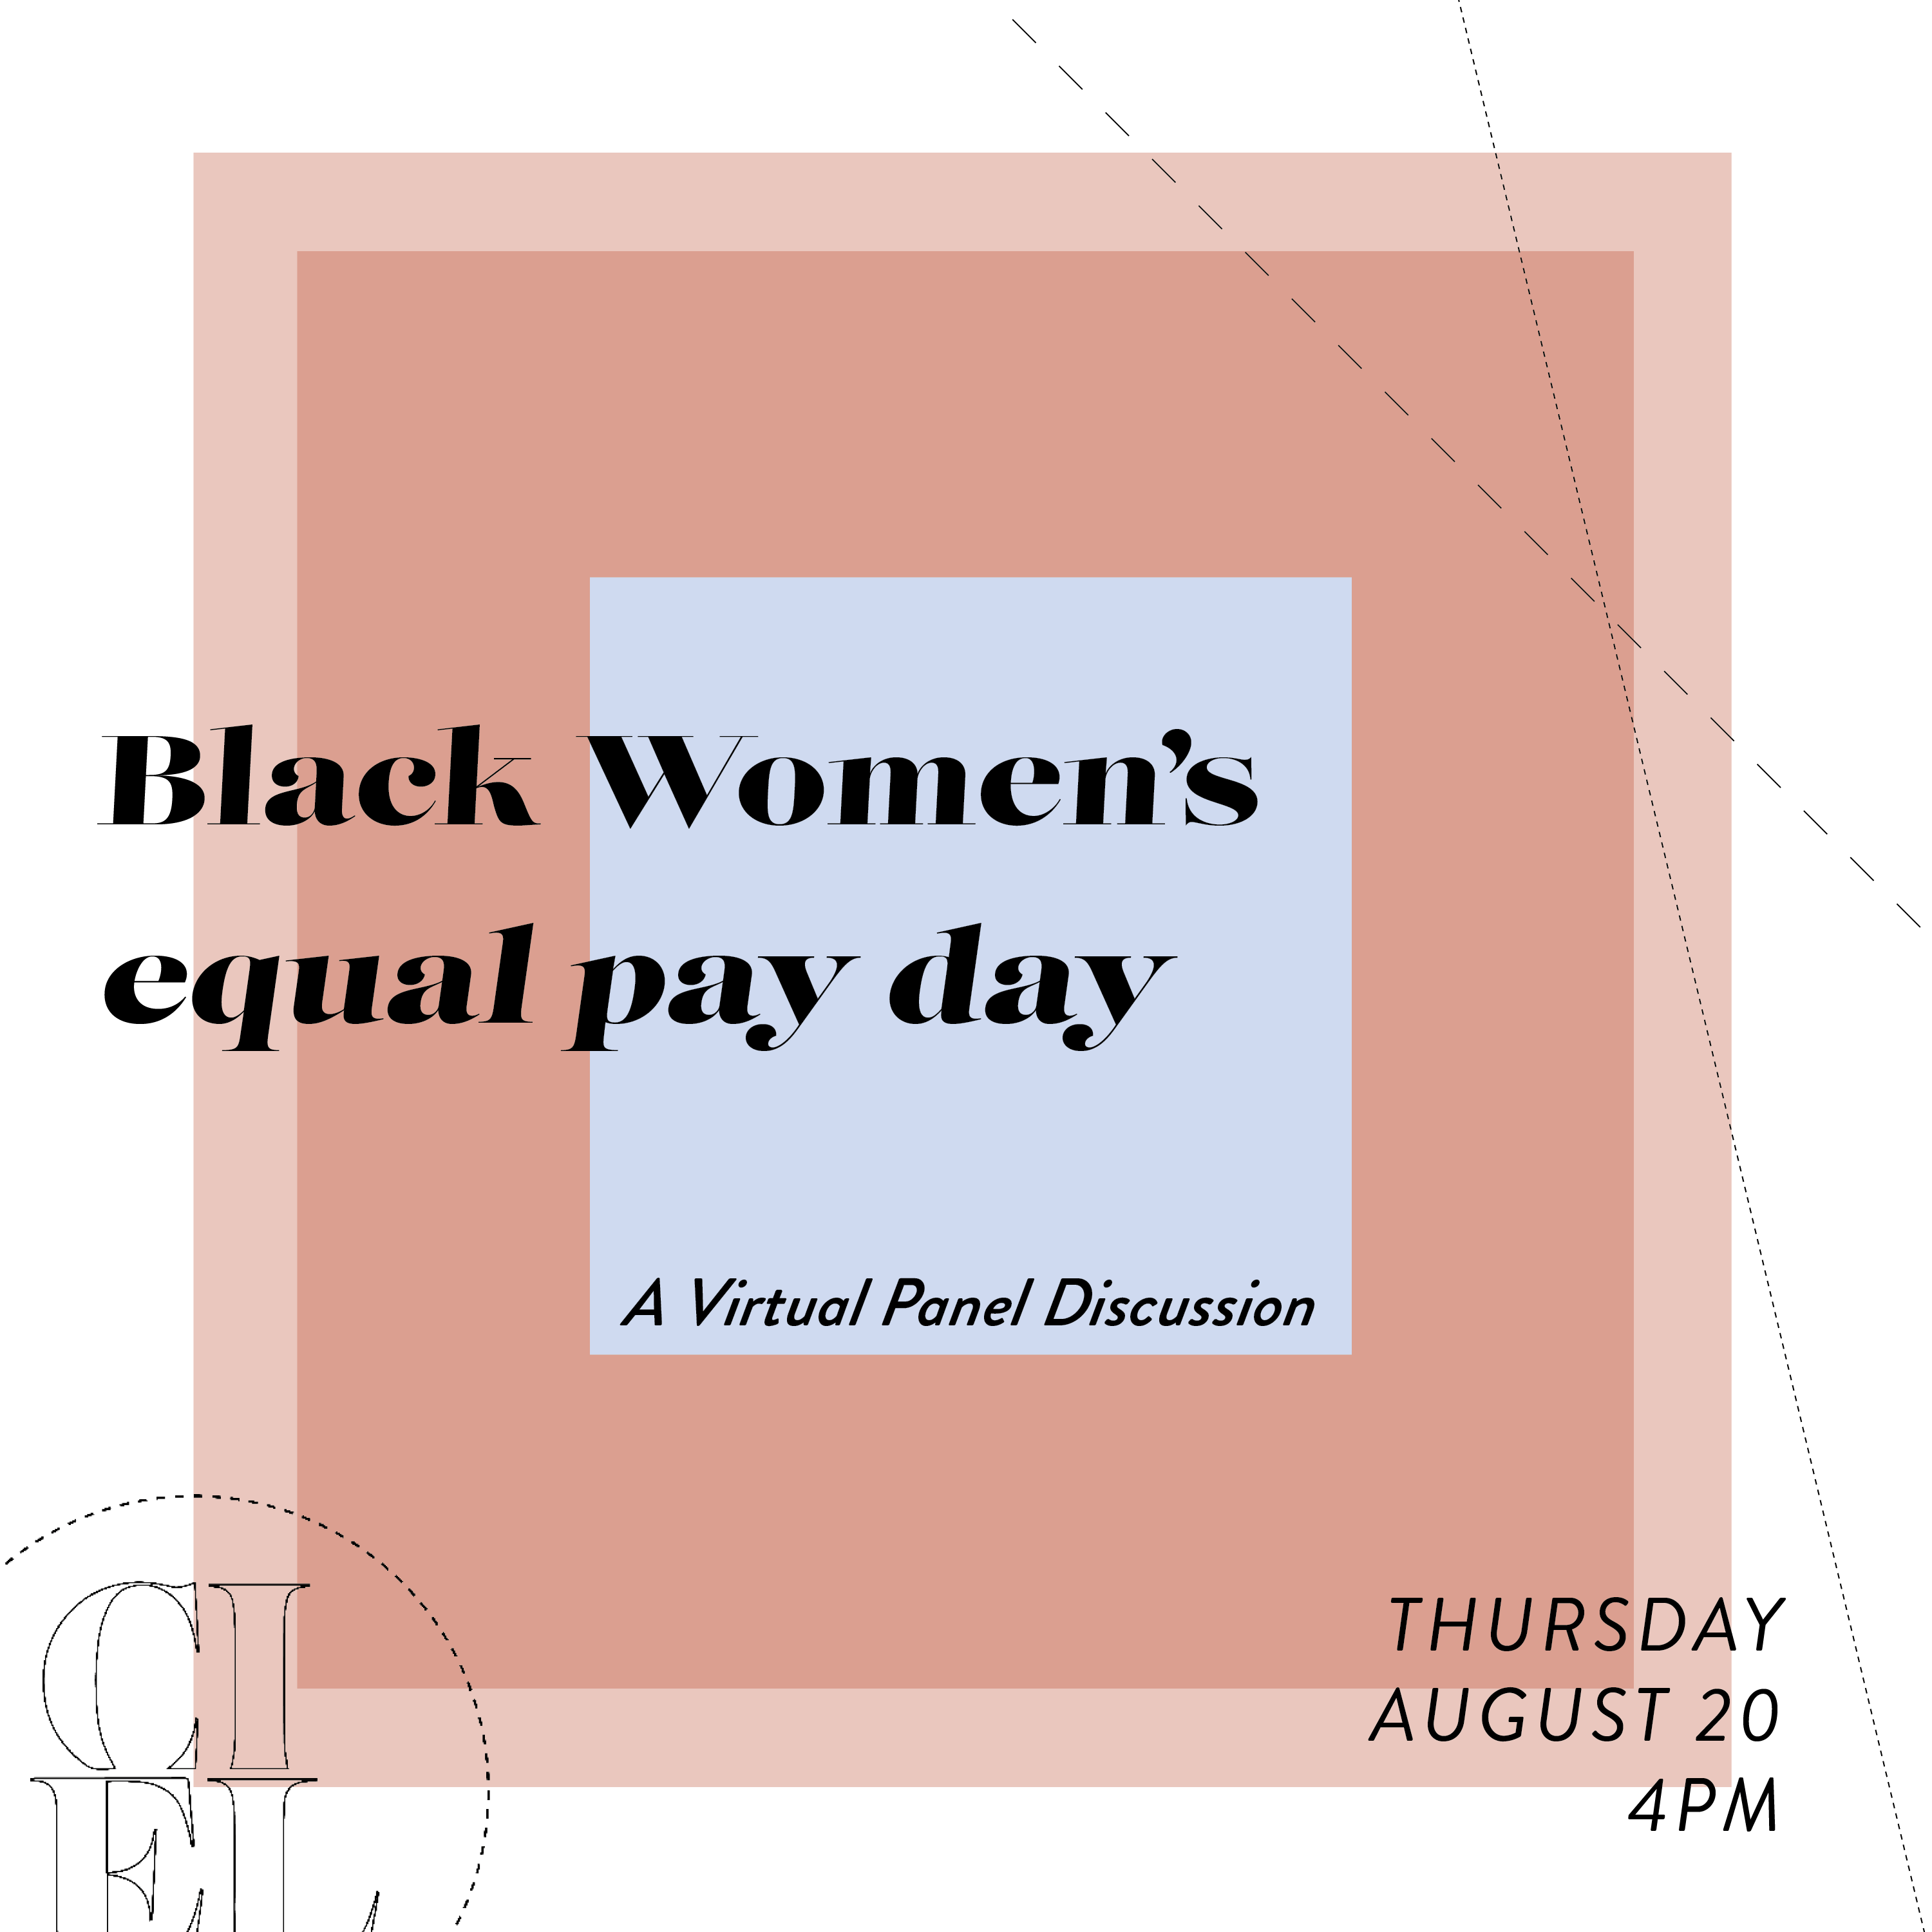 BLACK WOMEN’S EQUAL PAY DAY